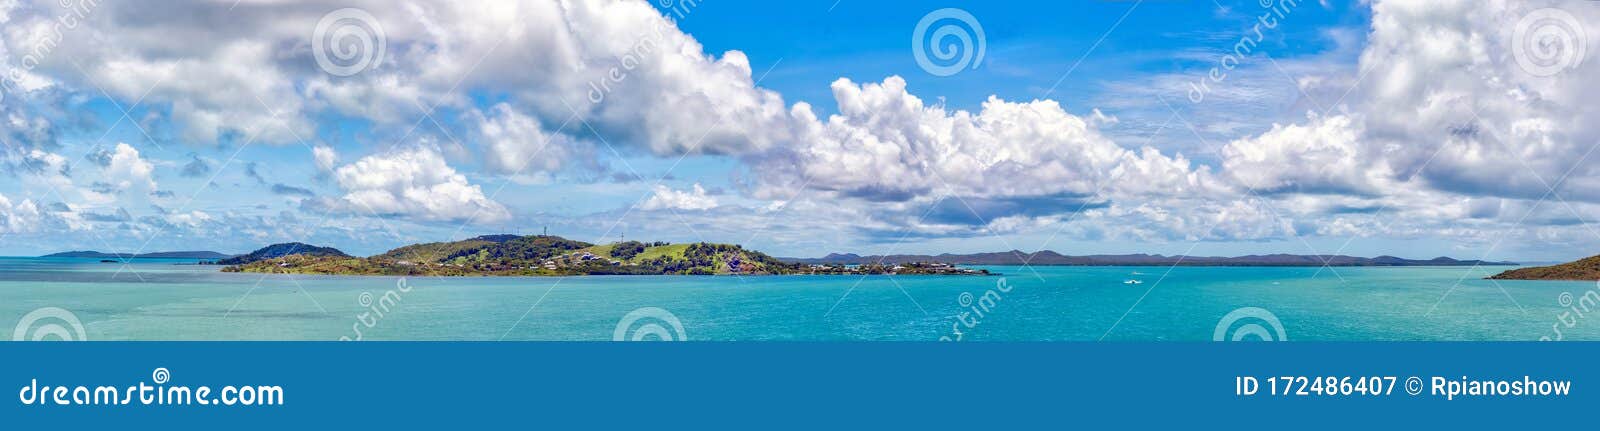 panoramic view of the thursday island in the torres strait at the most northern part of australia